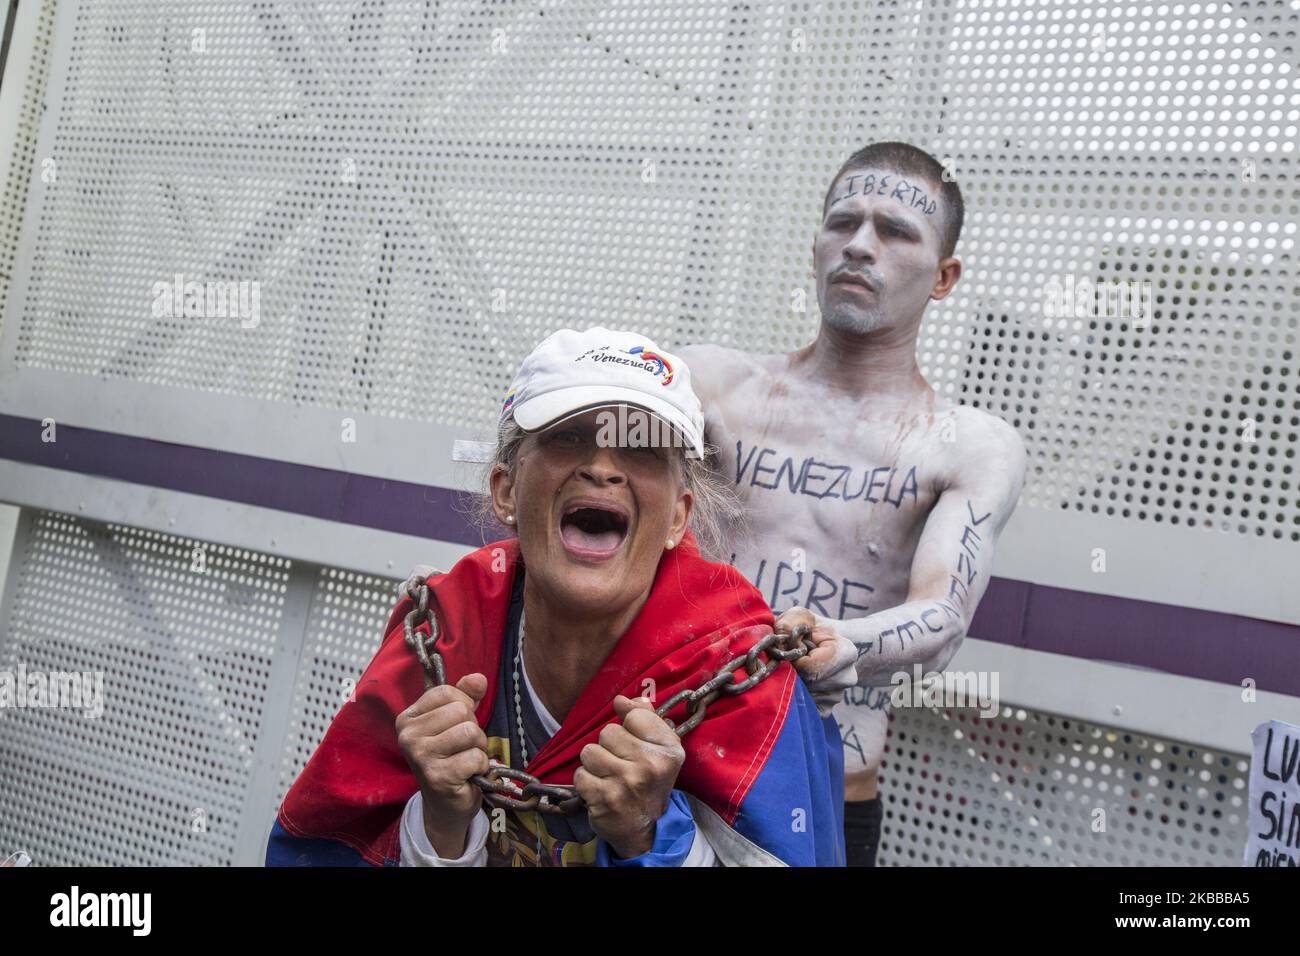 A university student demonstrates with his body painted during a protest against Venezuela's President Nicolas Maduro in Caracas on November 21, 2019. (Photo by Rafael Briceno Sierralta/NurPhoto) Stock Photo